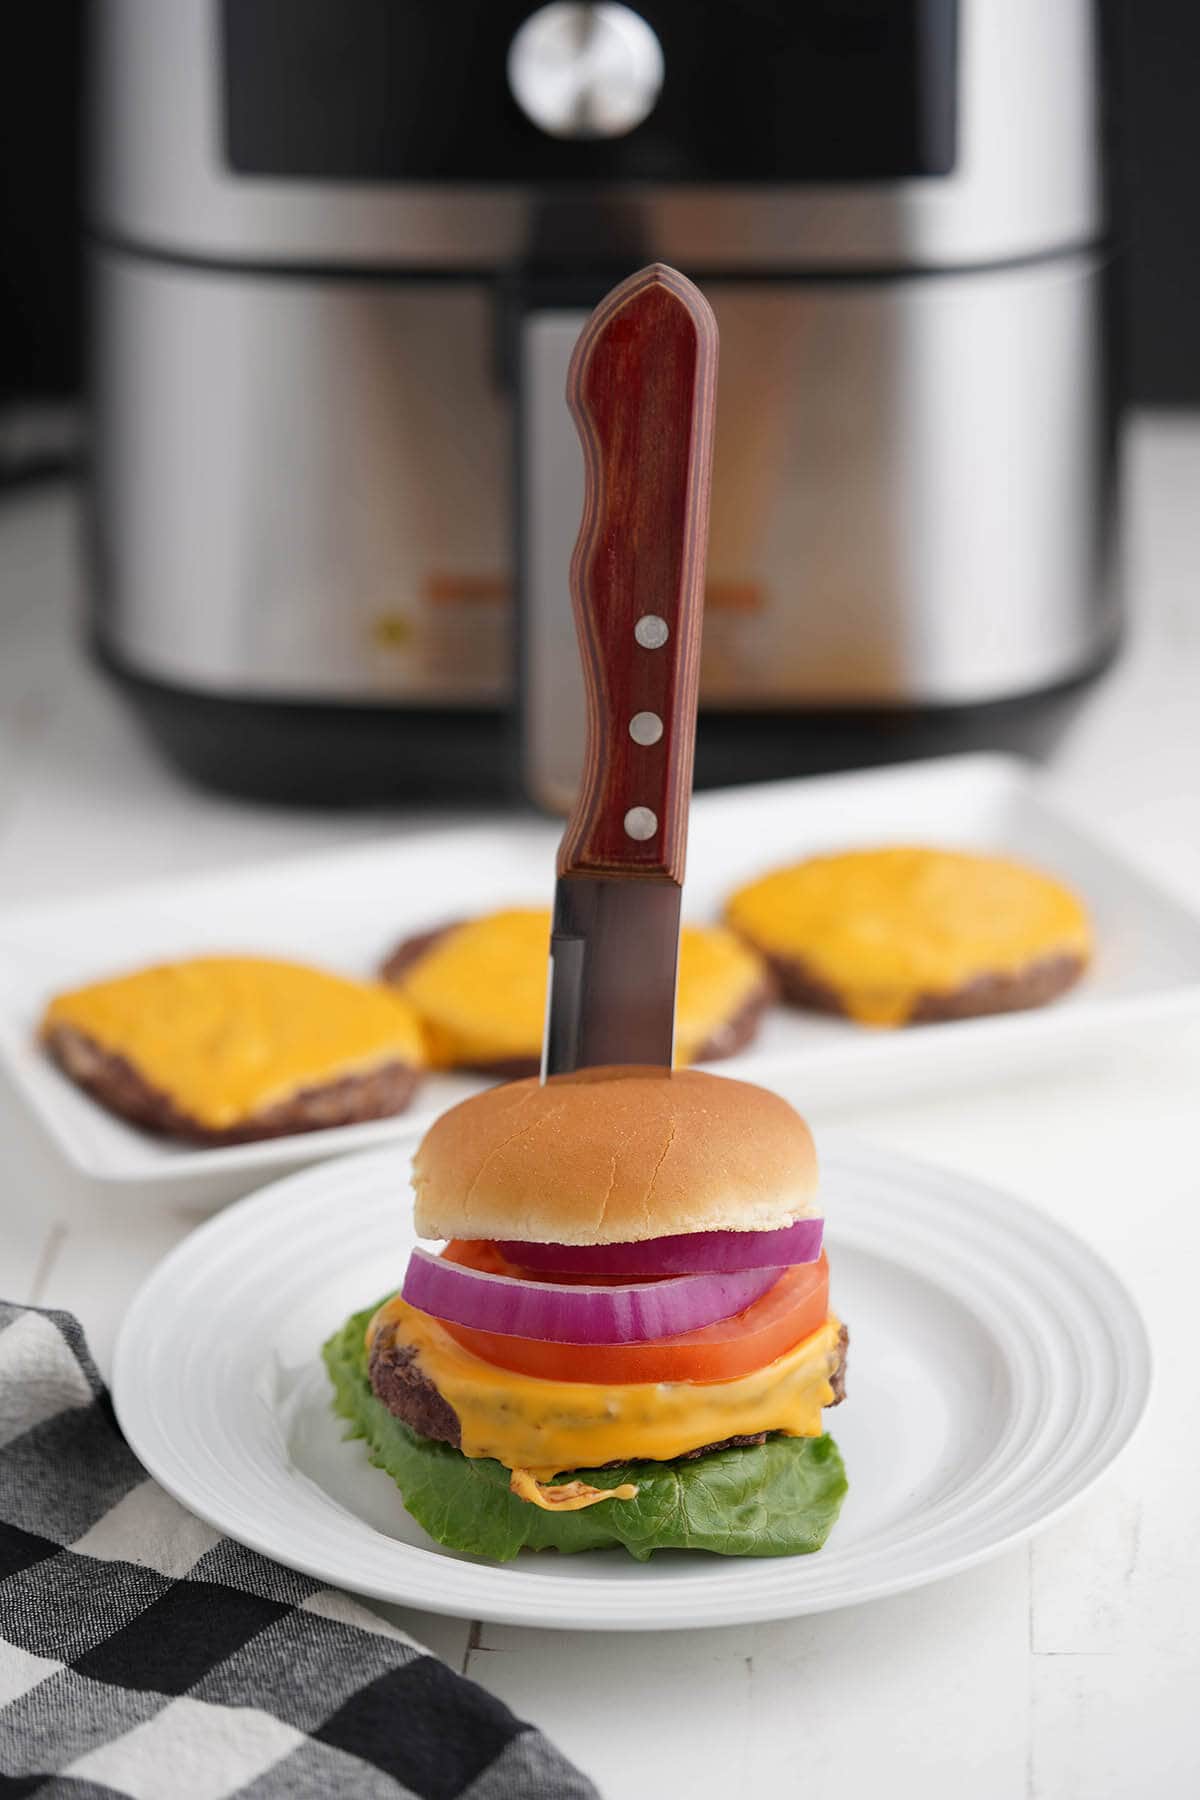 Grilled cheeseburger on plate.